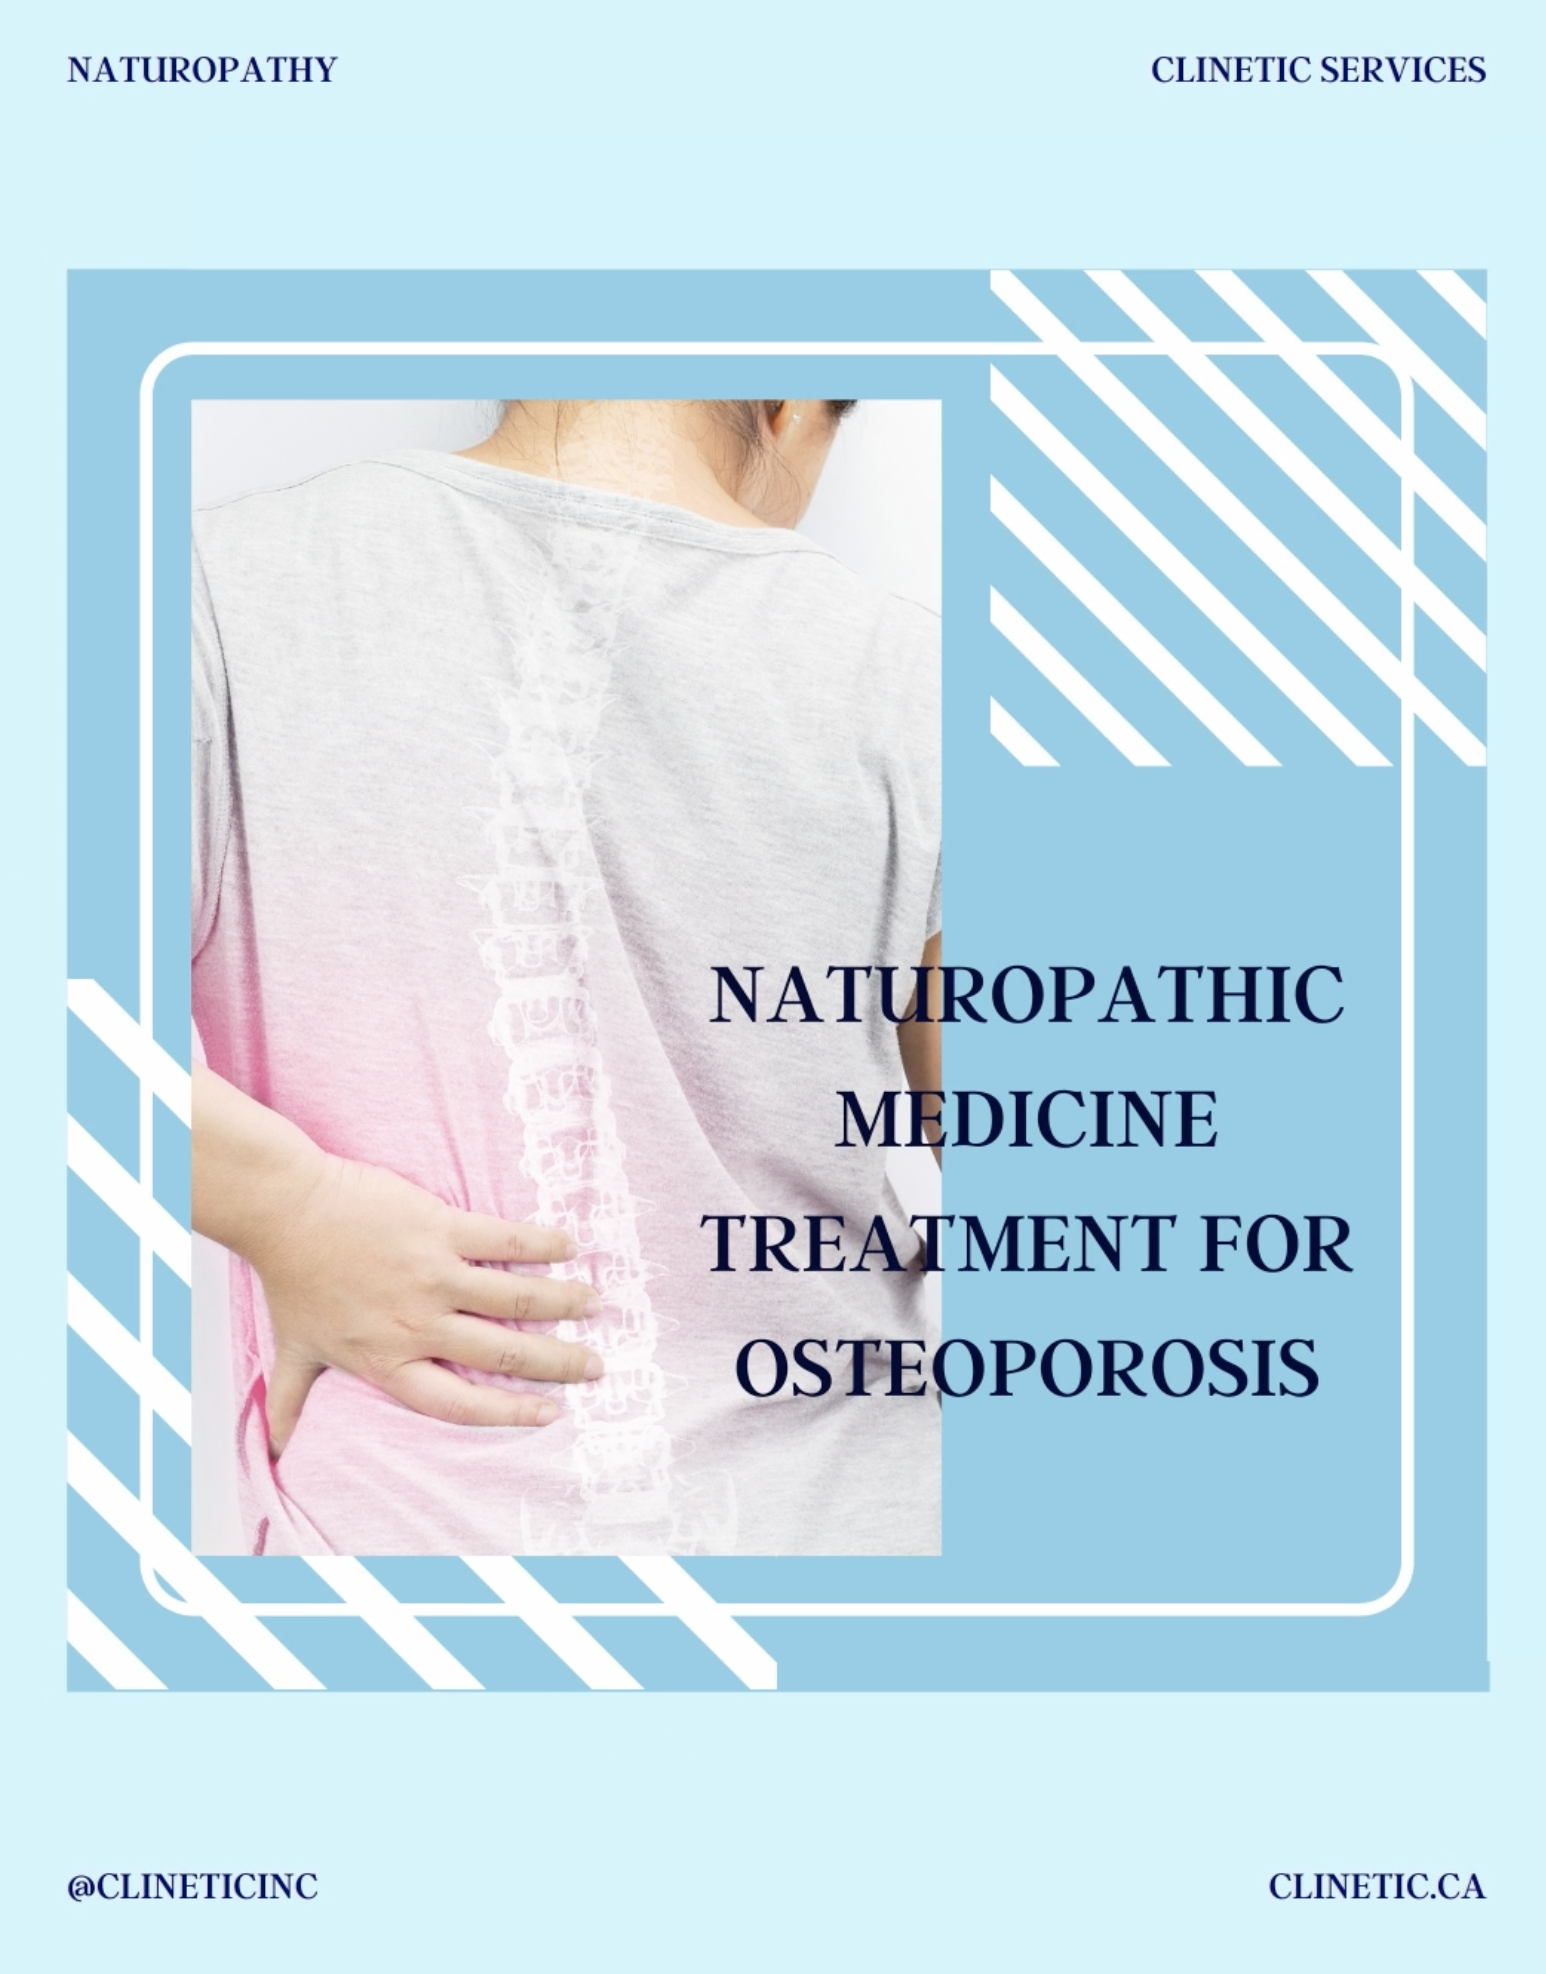 Naturopathic medicine treatment for Osteoporosis